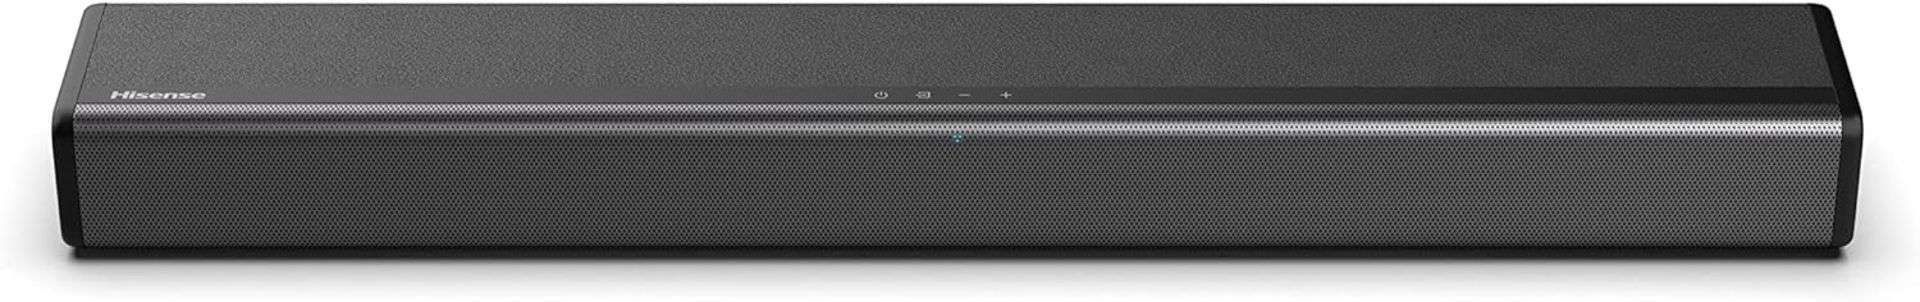 Hisense HS214 2.1Ch All- In-One 108W Soundbar with Built-In Subwoofer, Black, Compact Design, AUX,